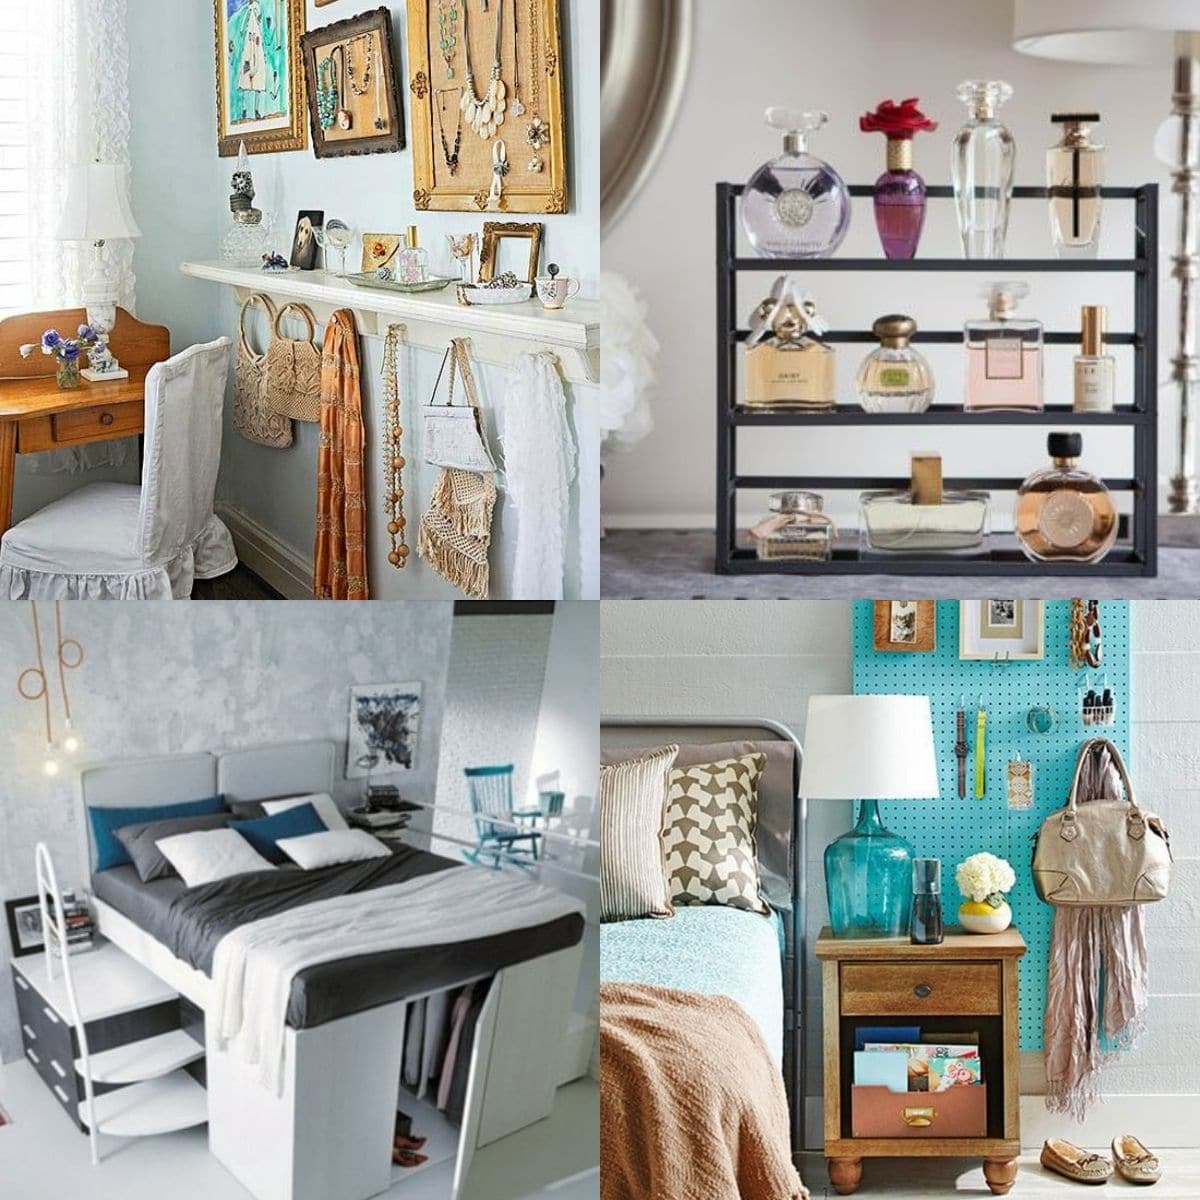 Increase storage in your small rooms with the fun hacks.

Keep your room both organized and stylish. 😉

#Storage #StorageIDeas #StorageSpace #SmallRooms #SmallRoomStorage #SmallRoomStorageIDeas

 LocalInfoForYou.com/341884/small-r…